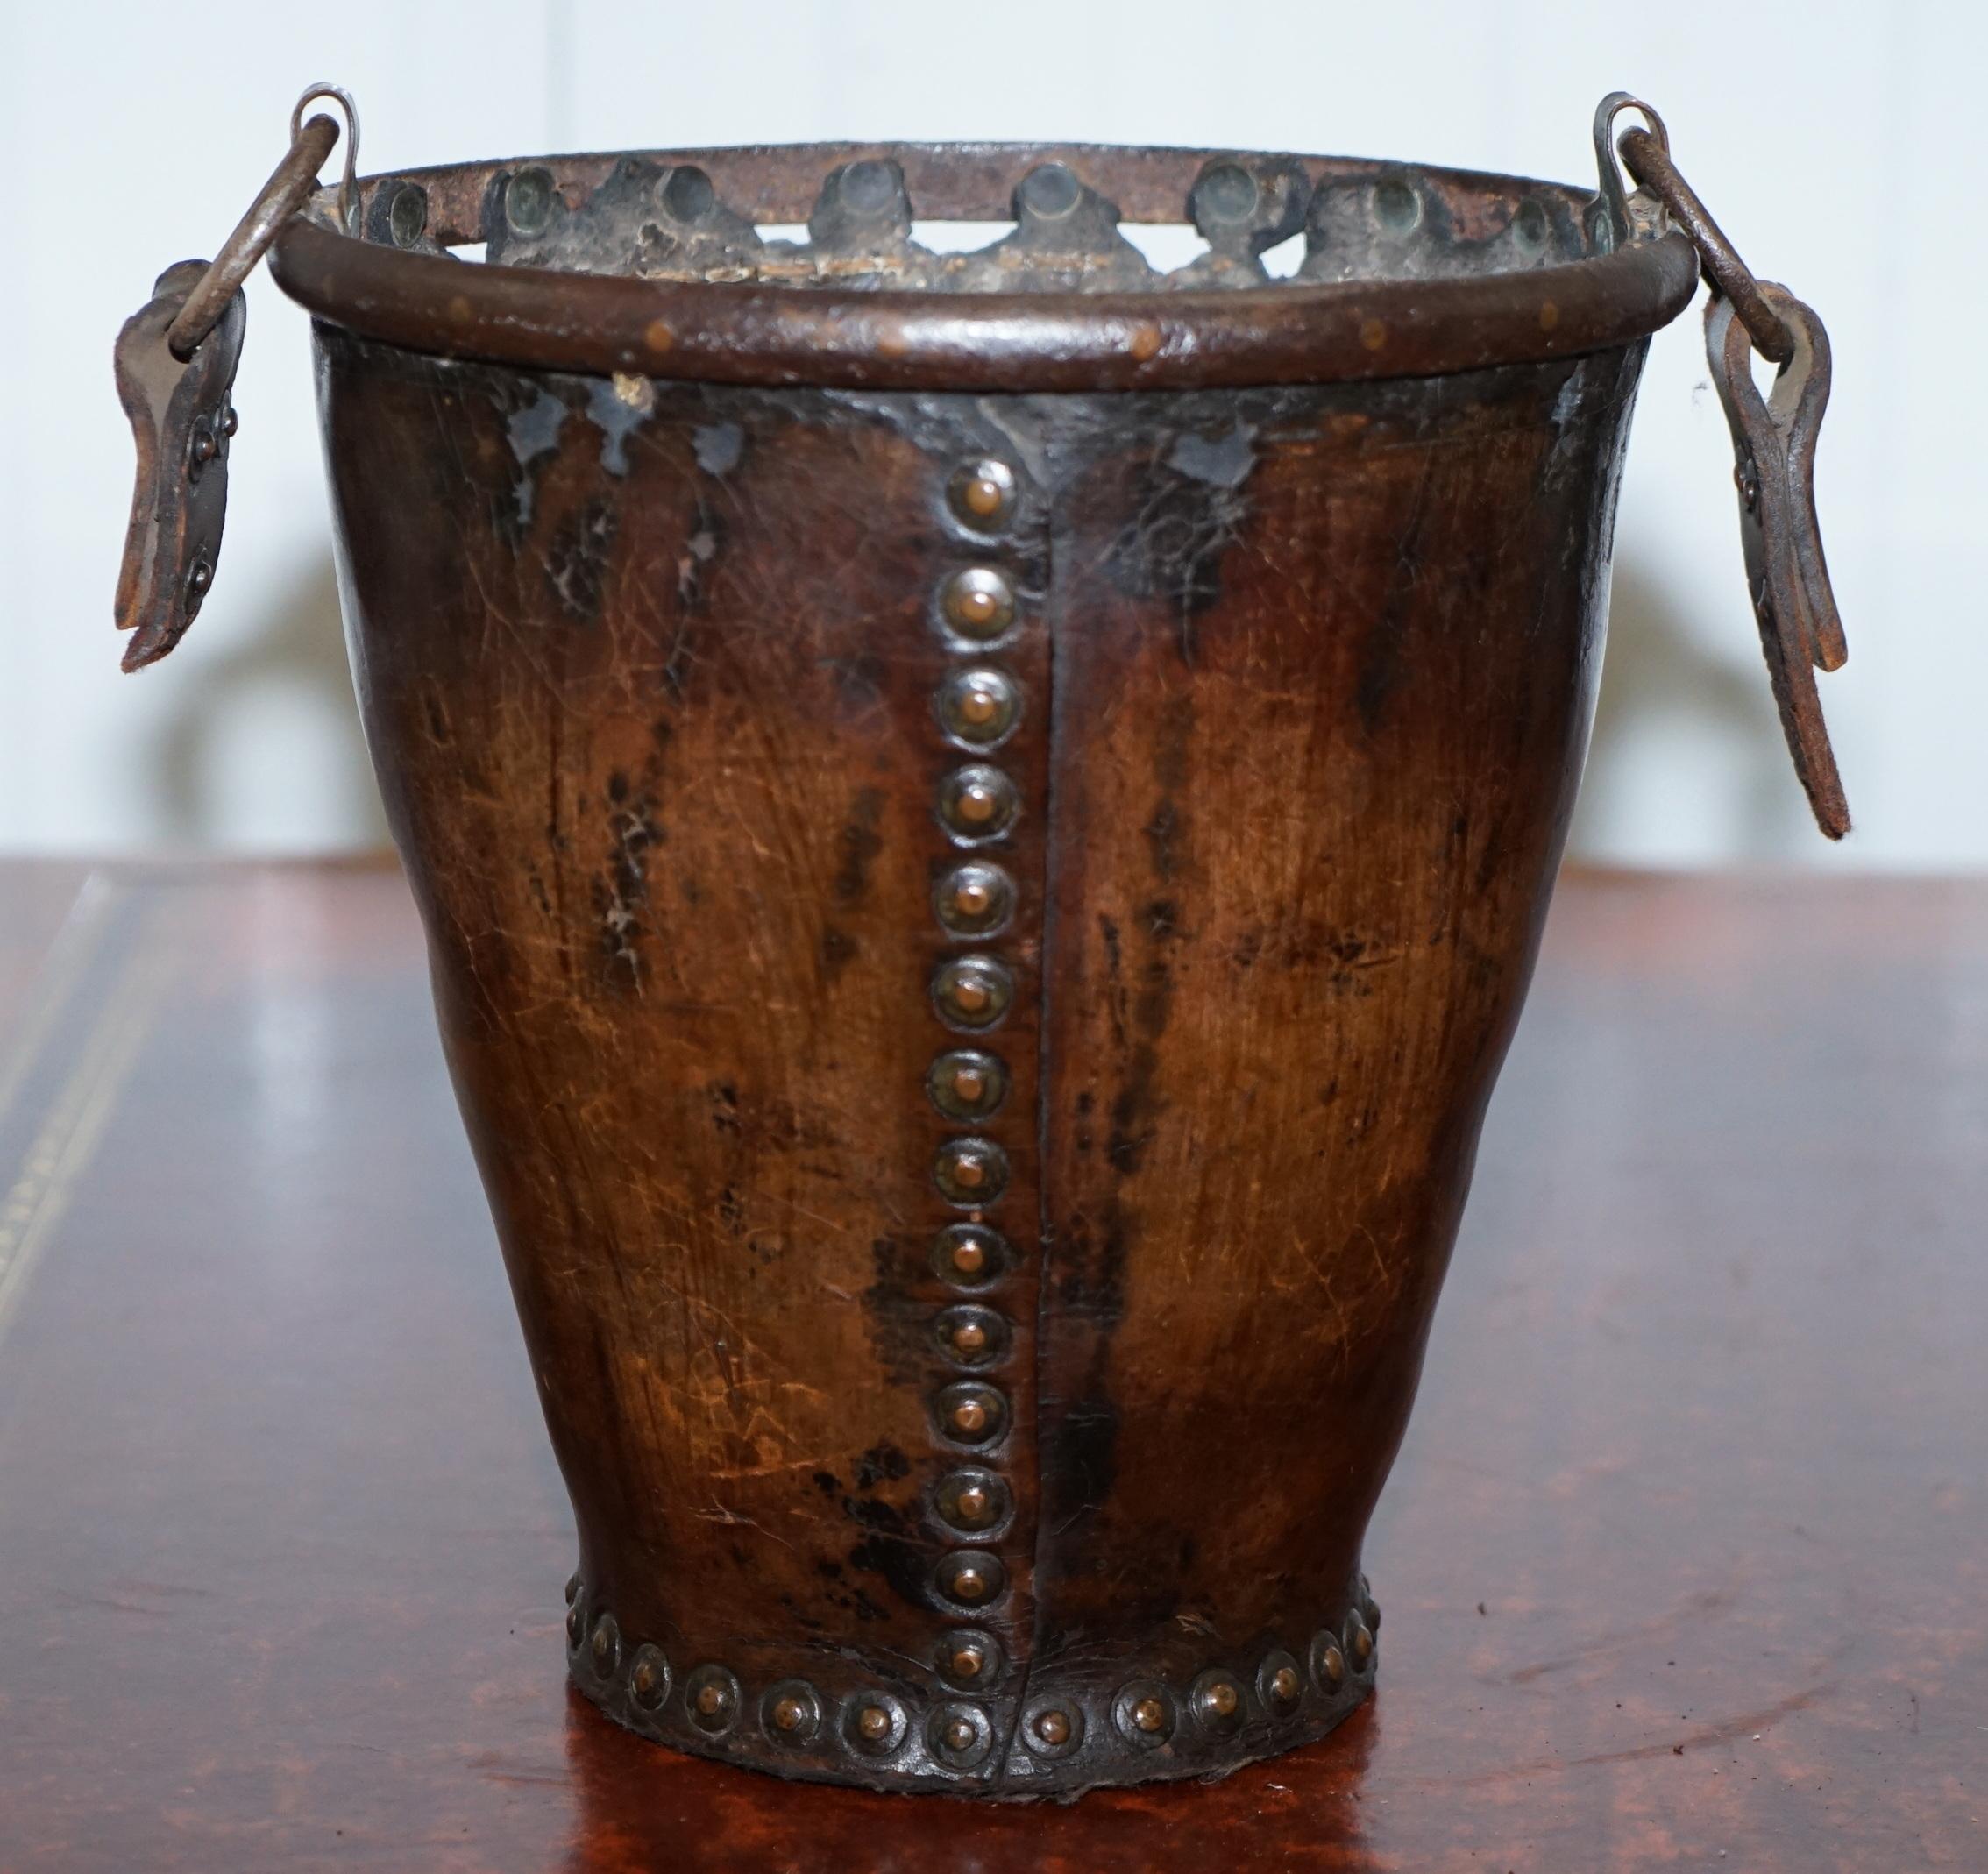 We are delighted to offer for sale this stunning original circa 1740 iron and leather bound fire bucket with original handle

I have another which is circa 1800 listed under my other items

A very decorative and well made piece, nearly 300 years